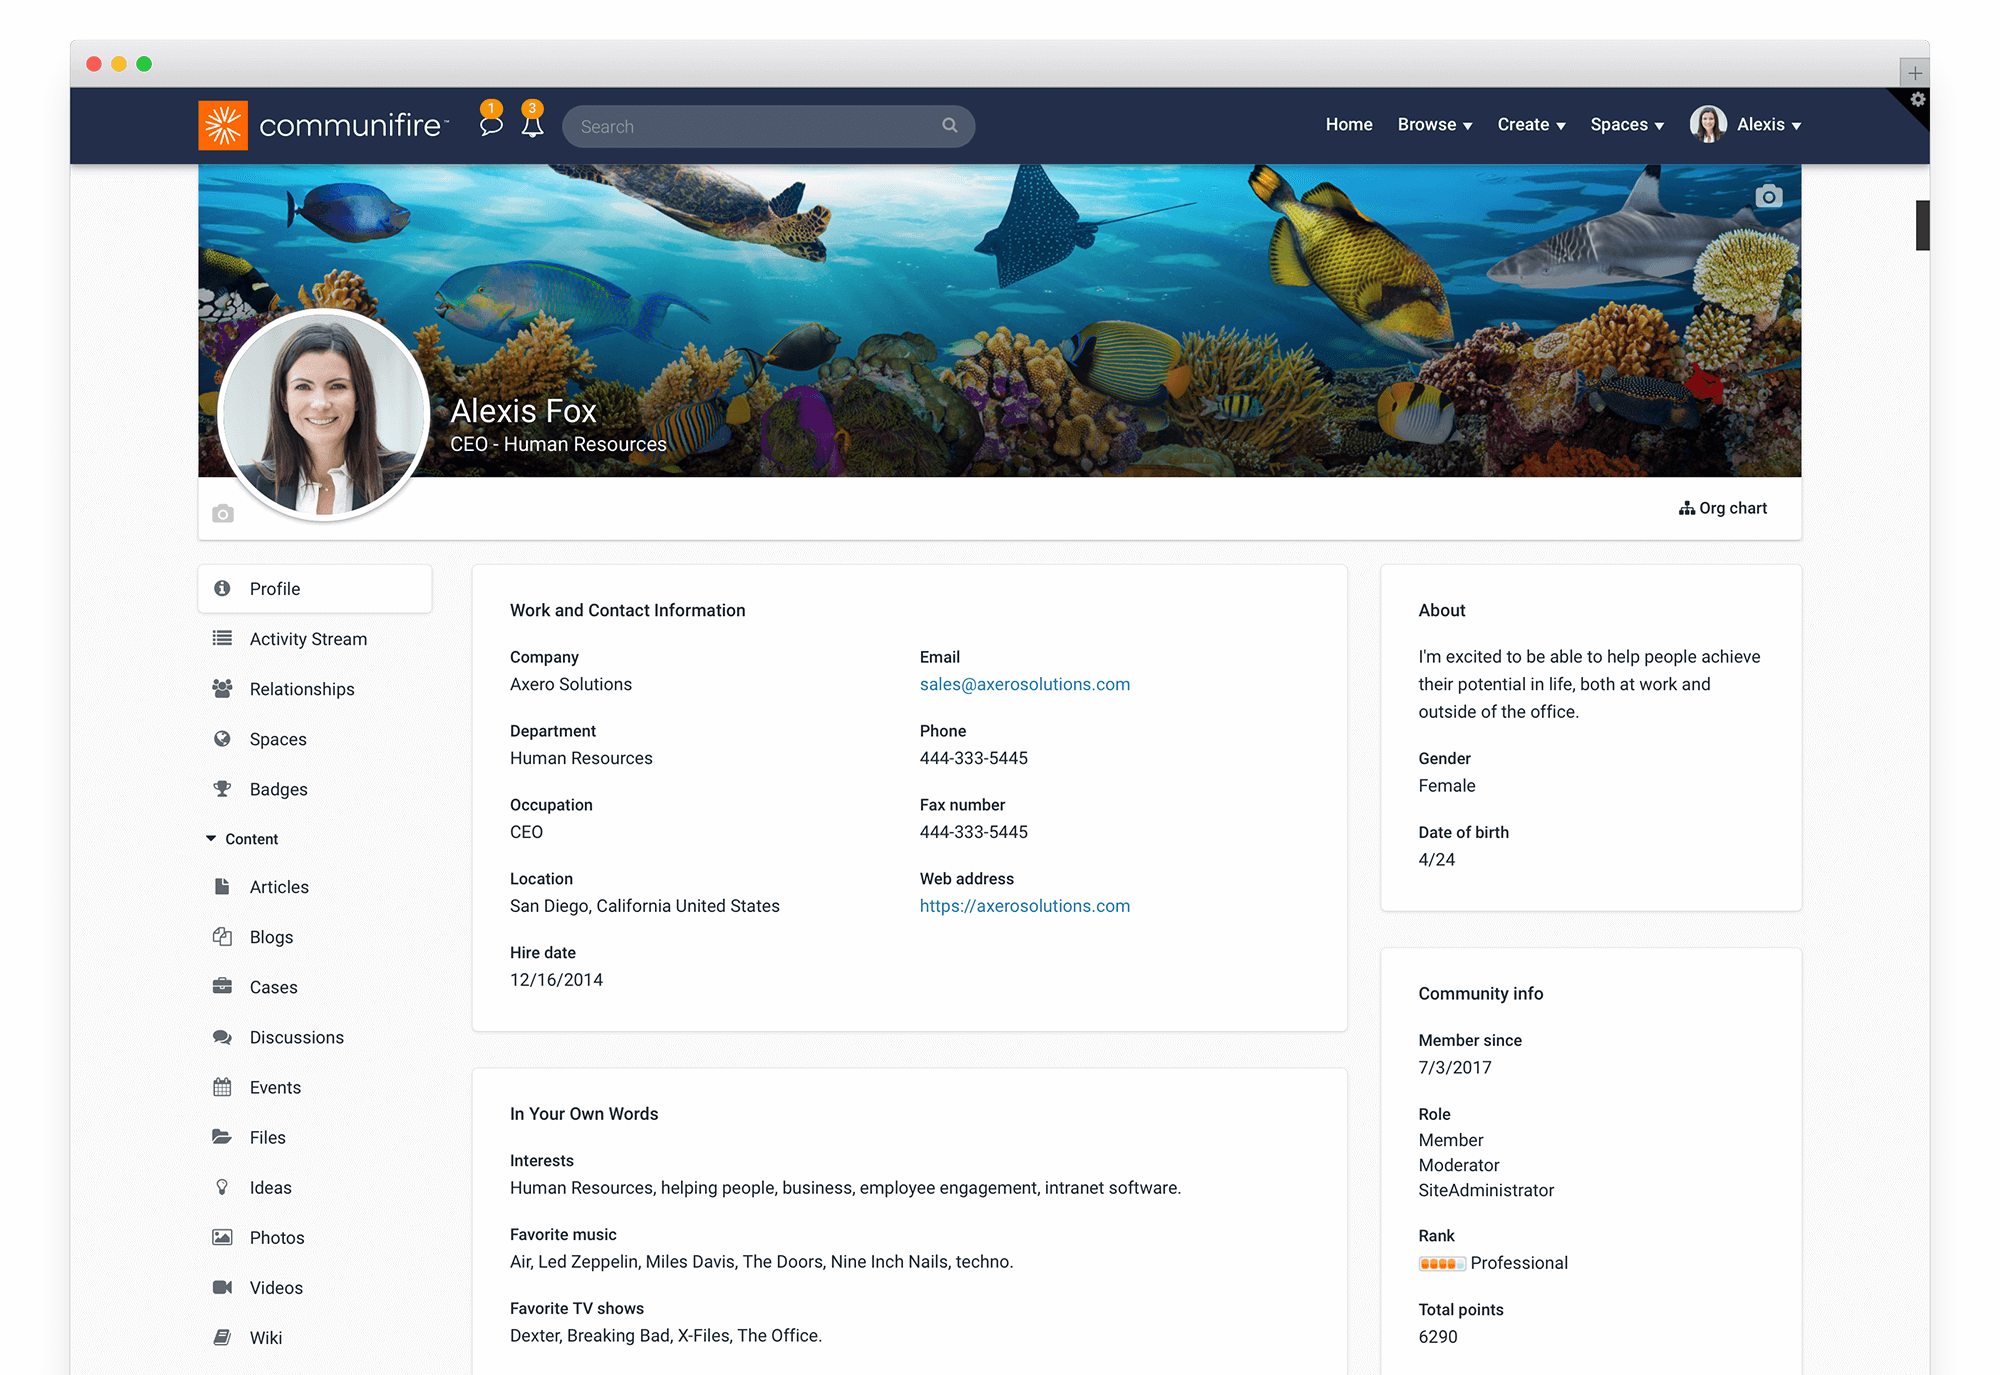 Employee profiles for professional services